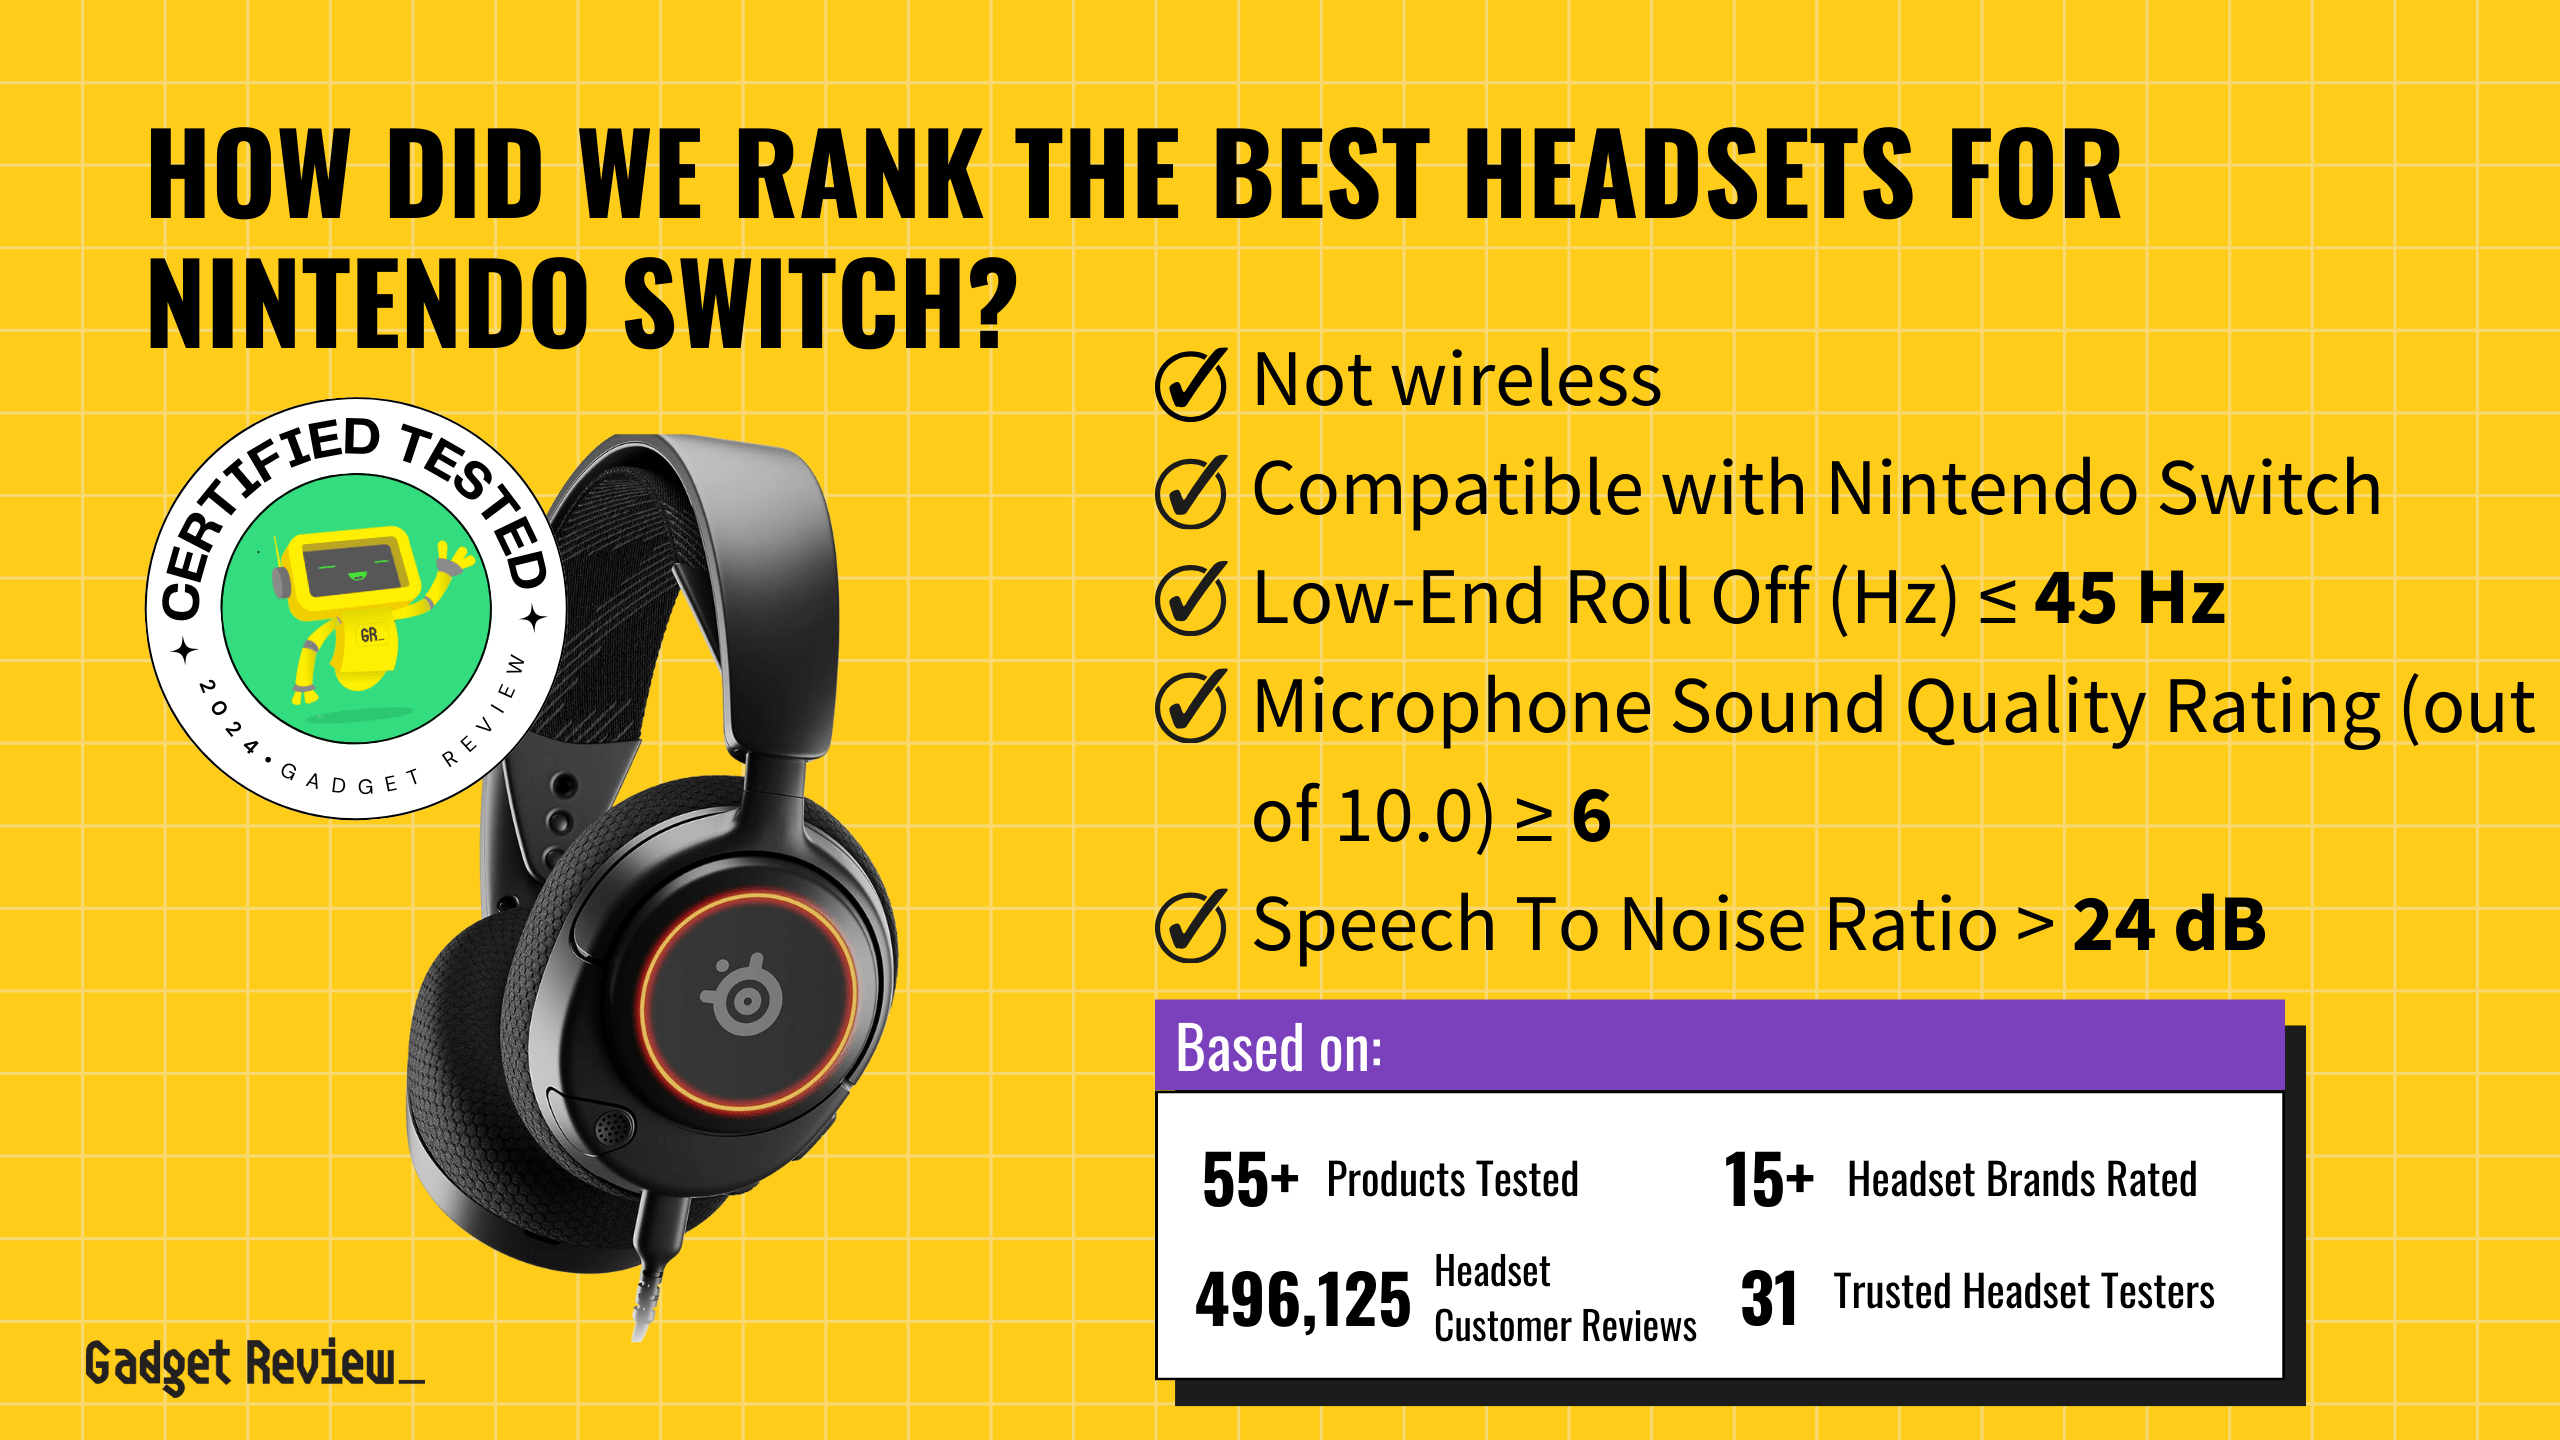 3 Top Headsets For Nintendo Switch Ranked